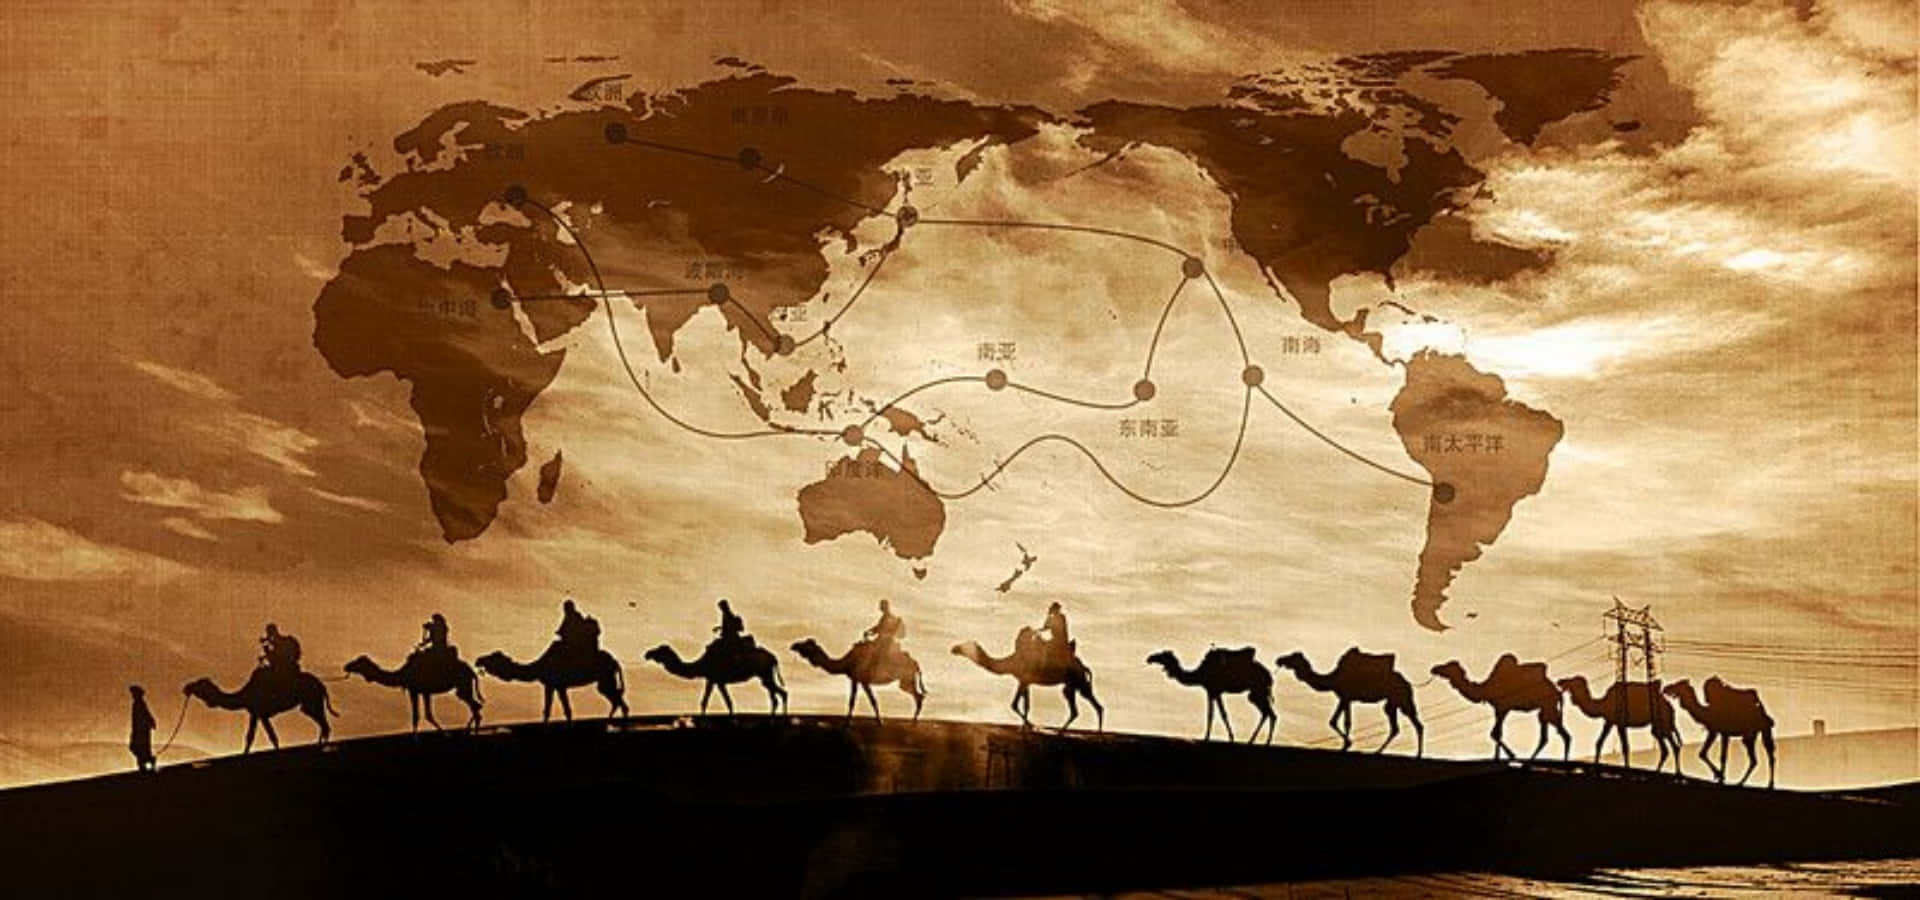 a group of camels with a map of the world